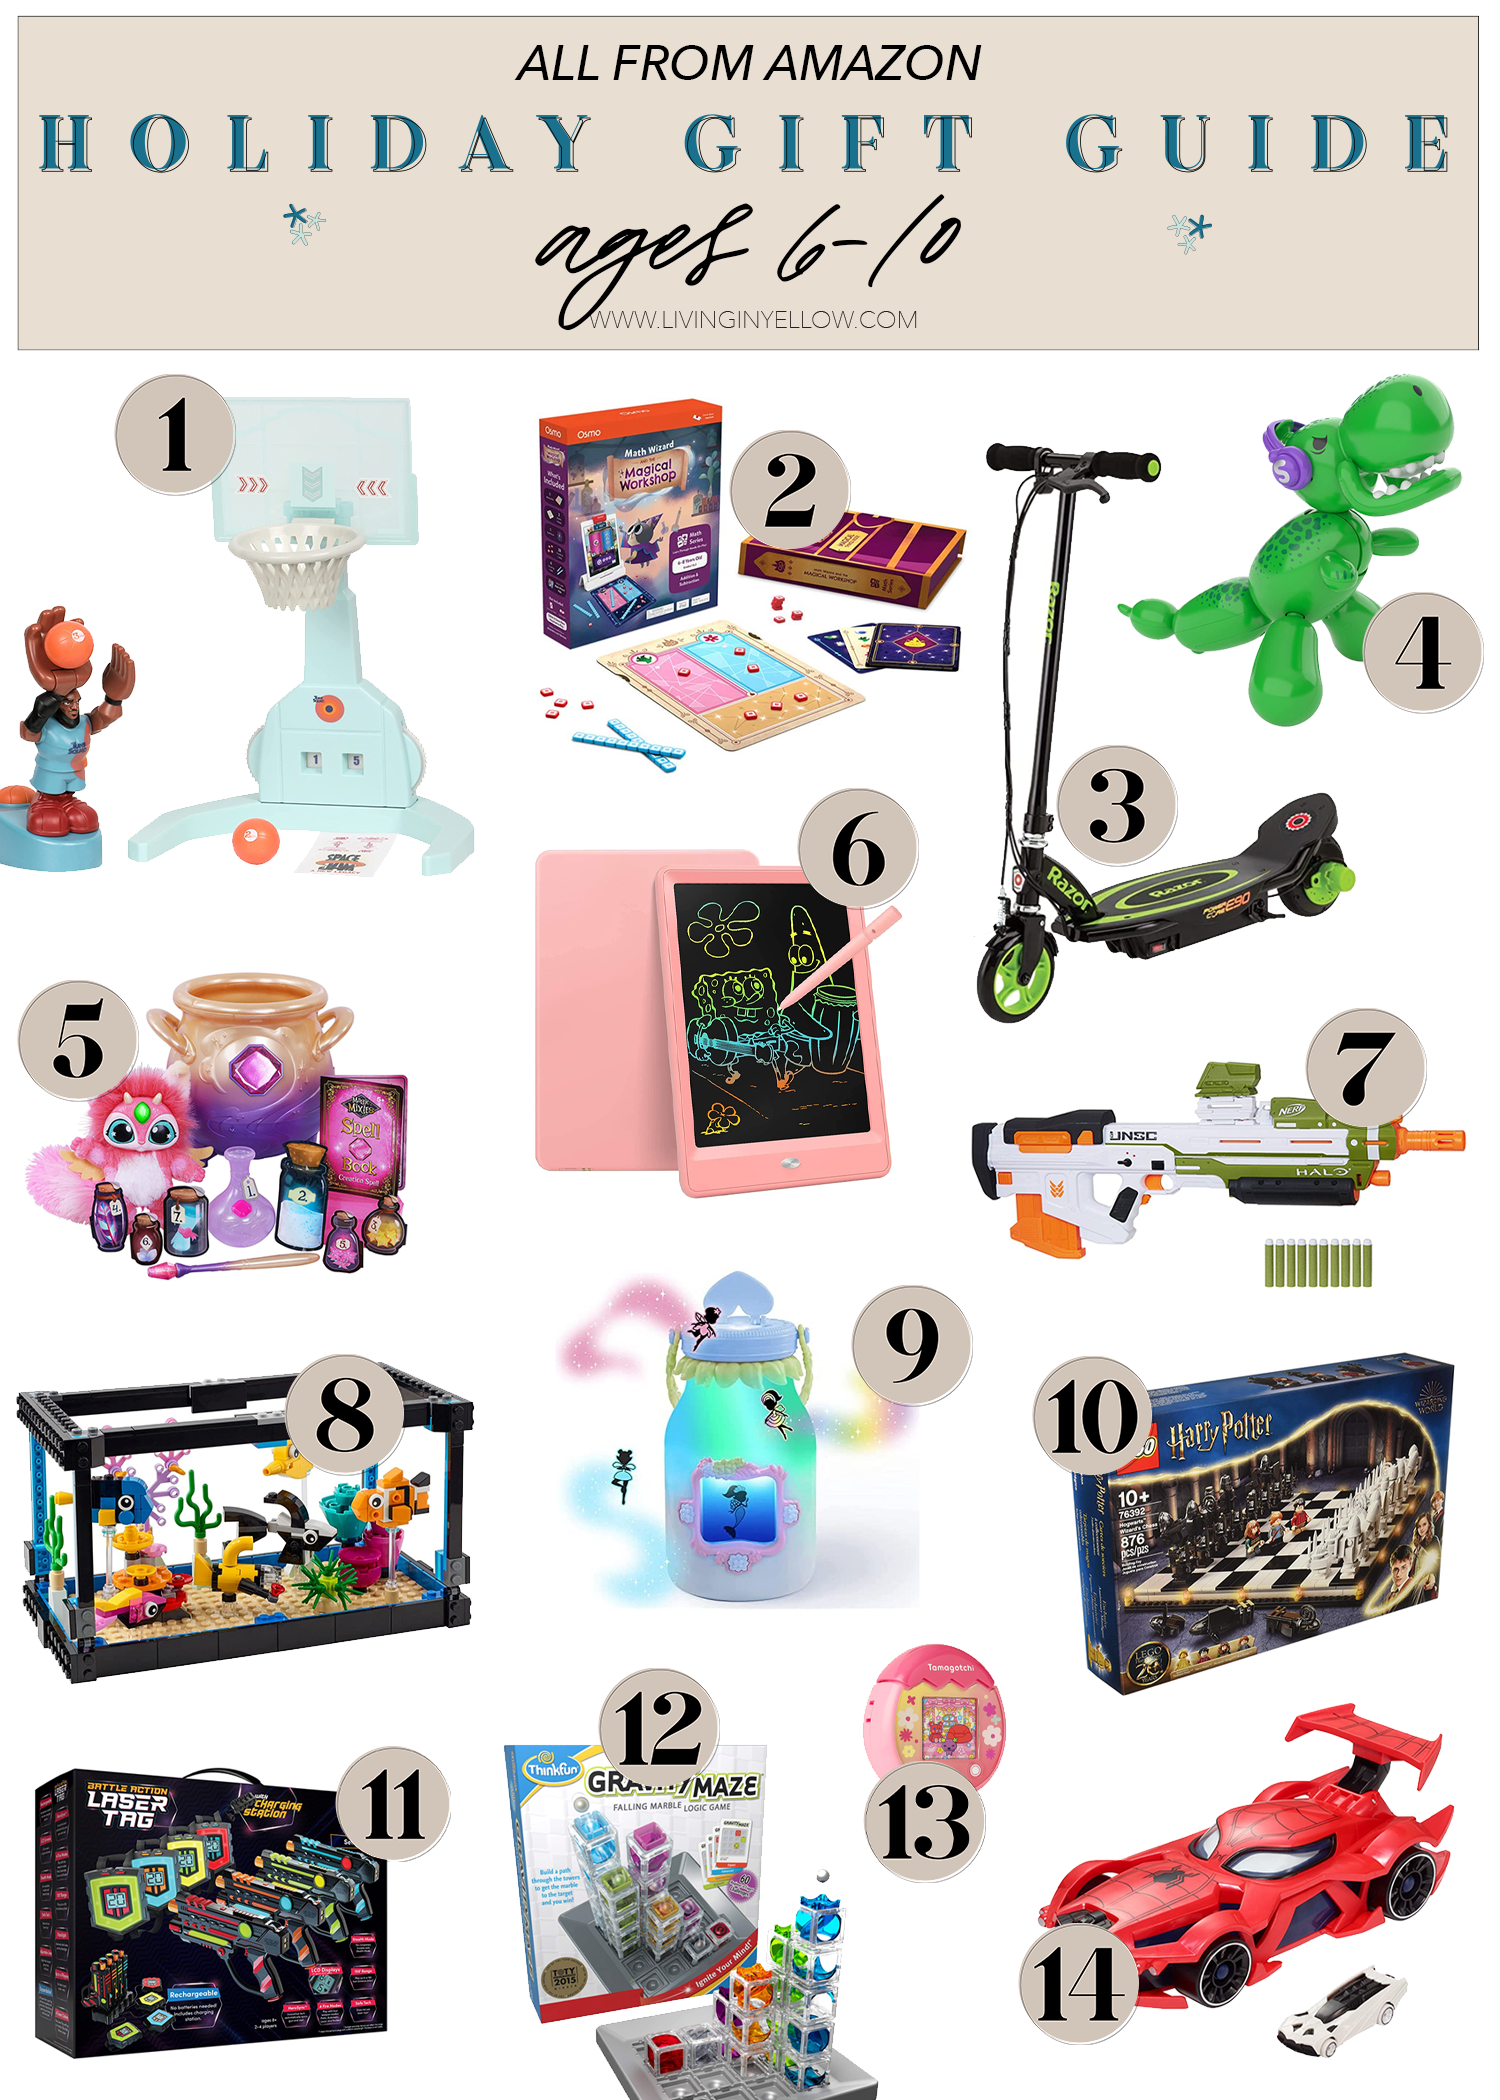 Selfridges predicts its best-selling Christmas toys for 2022 -Toy World  Magazine